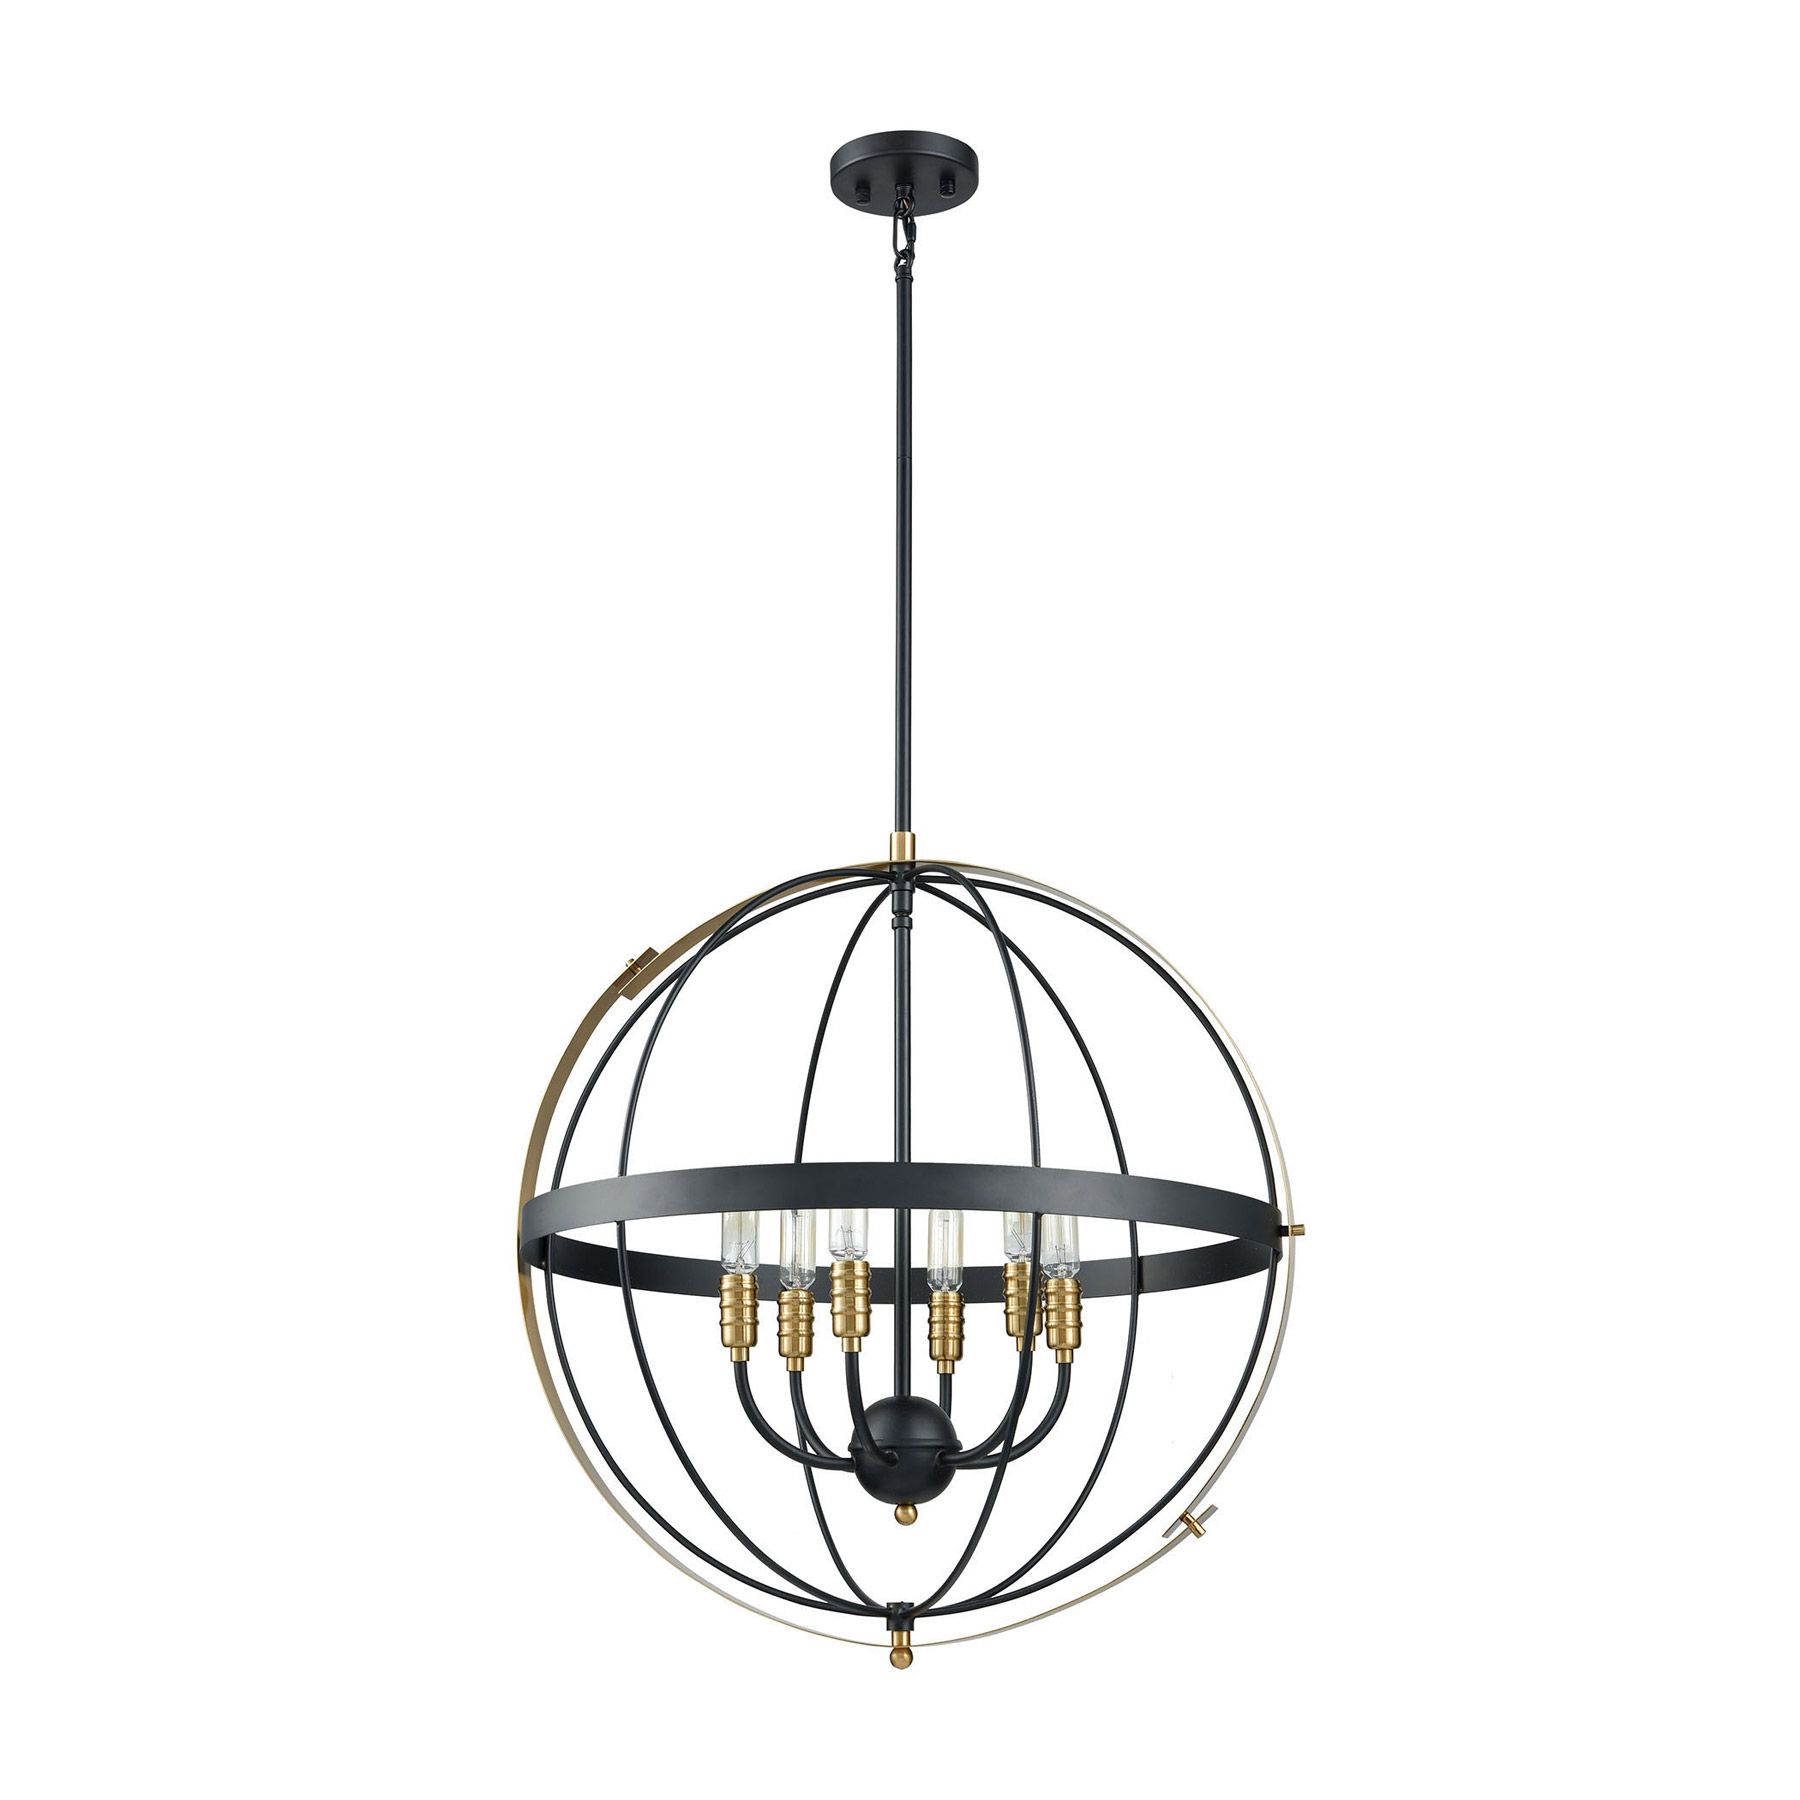 Satin Brass 27 Inch Five Light Chandeliers Throughout Most Up To Date Elk Lighting 15286/6 6 Light Chandelier In Matte Black And (View 9 of 20)